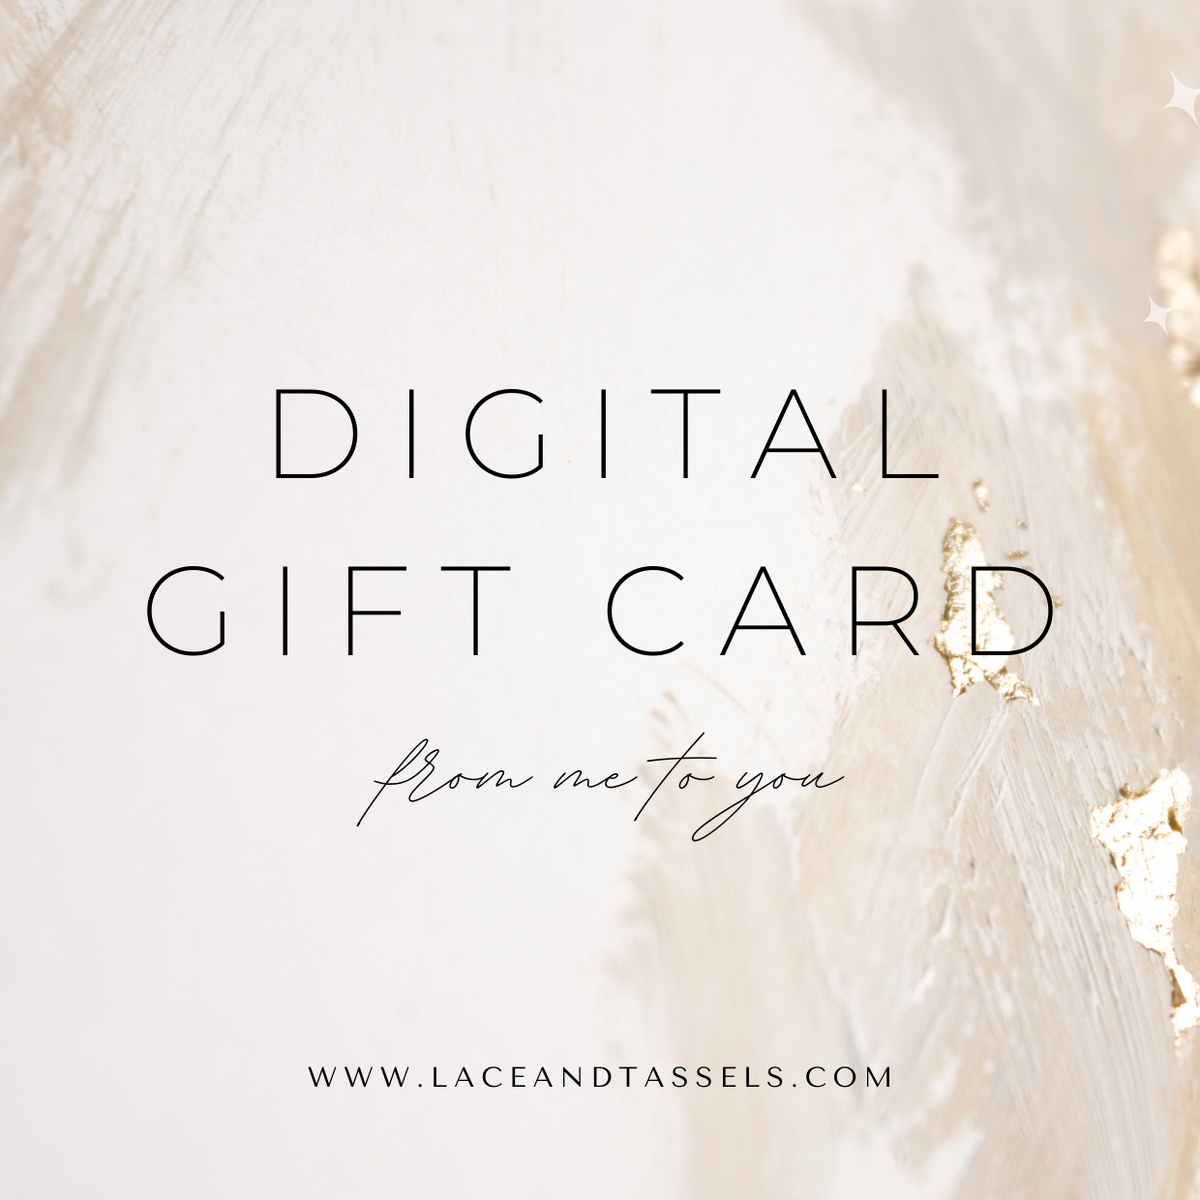 Digital Gift Card (From €10-€300)